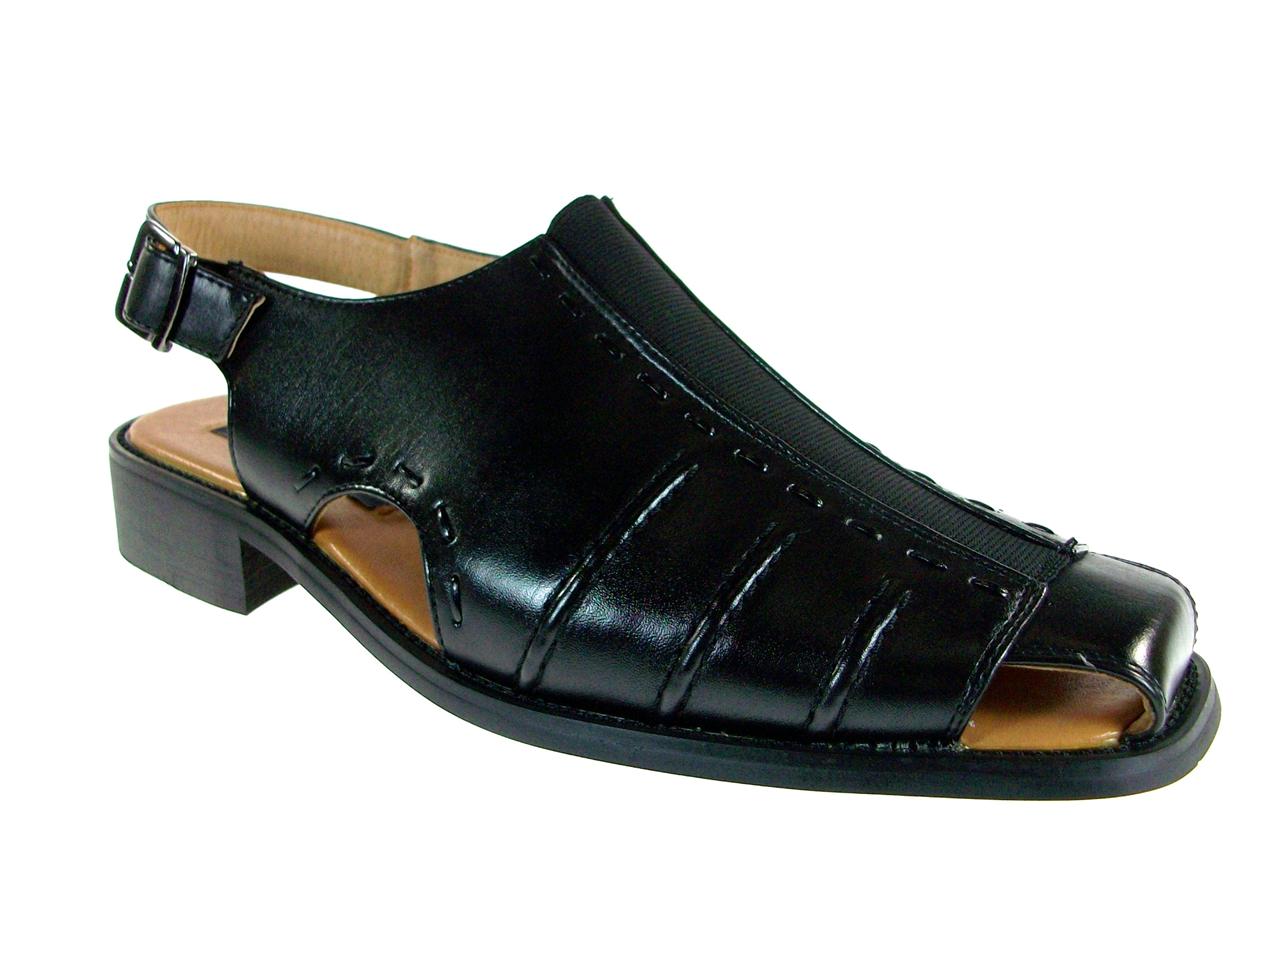 ... Mens Fashion Closed Toe Casual Dress Shoe Sandals w Leather Lining